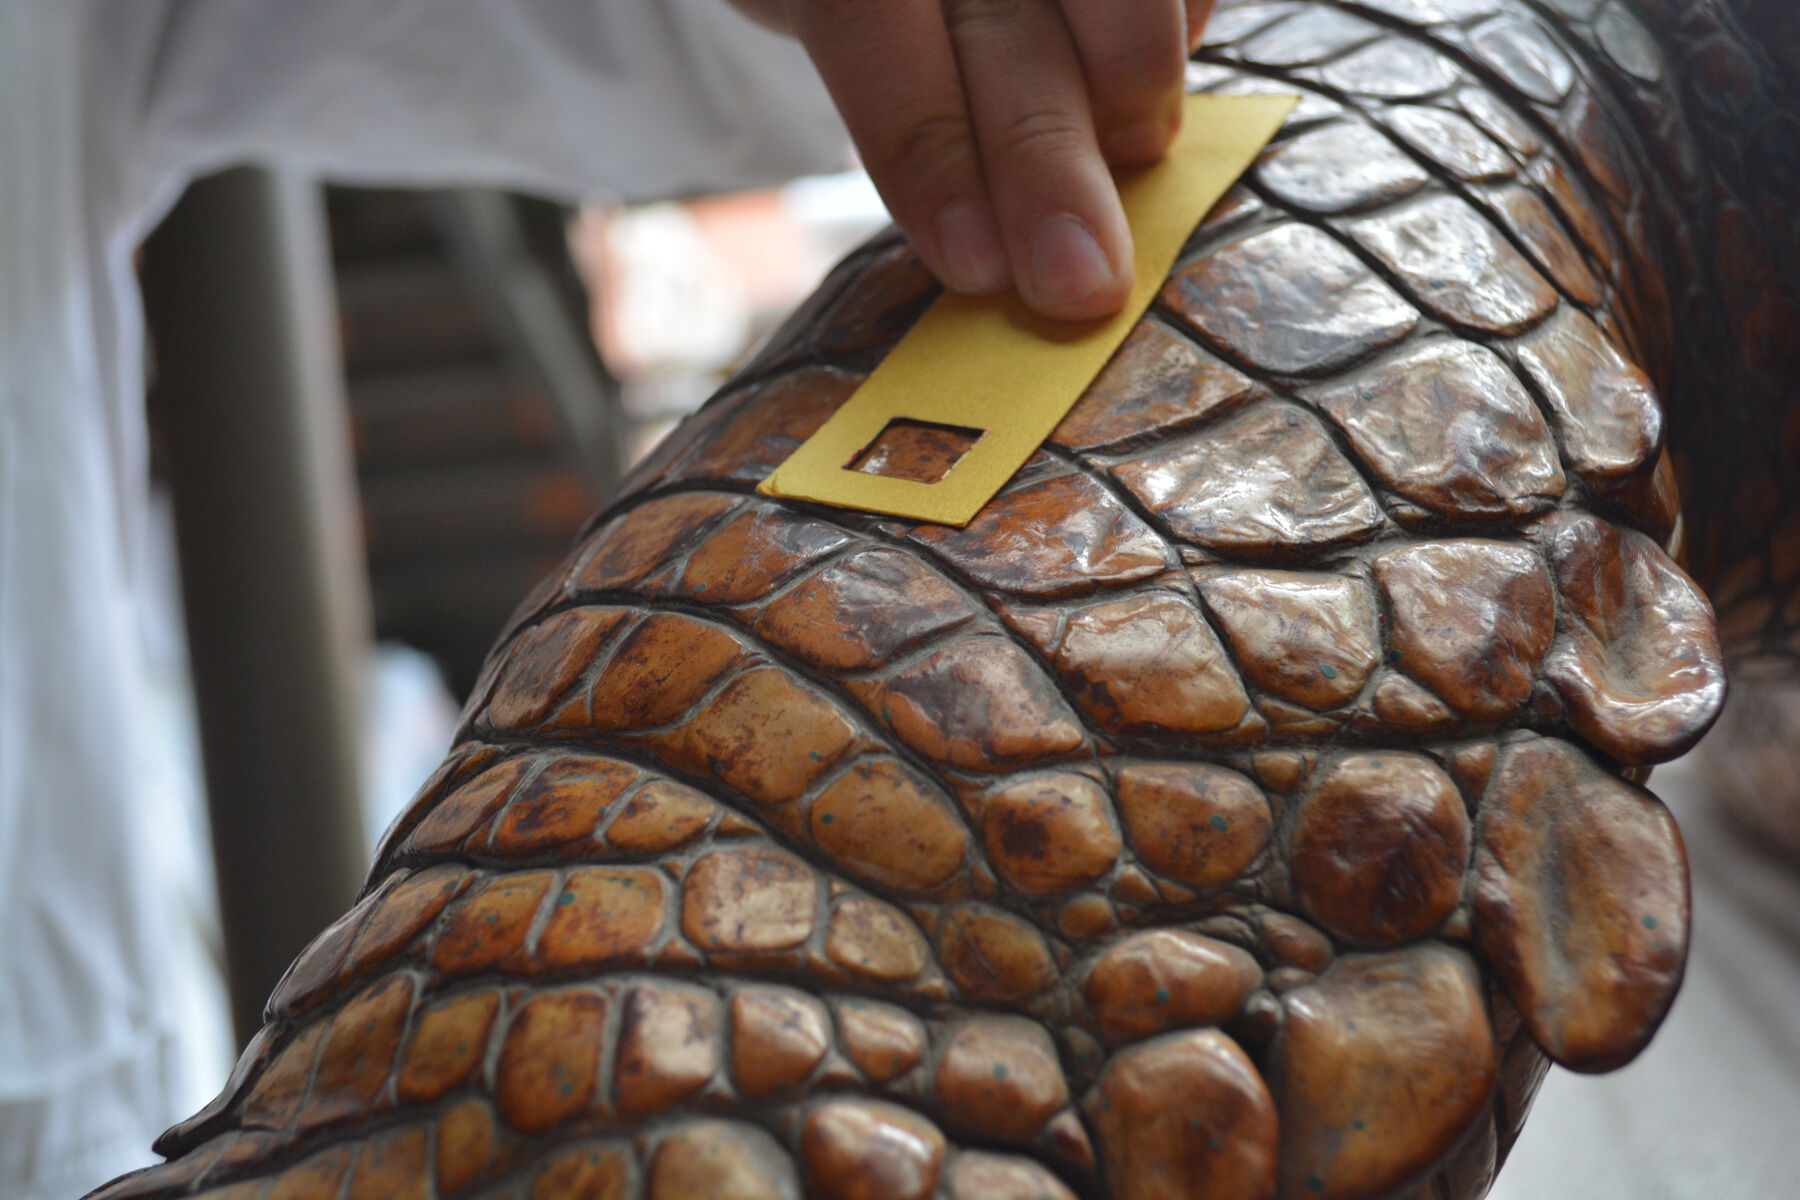 A close-up view of a person inspecting a taxidermied crocodile scales